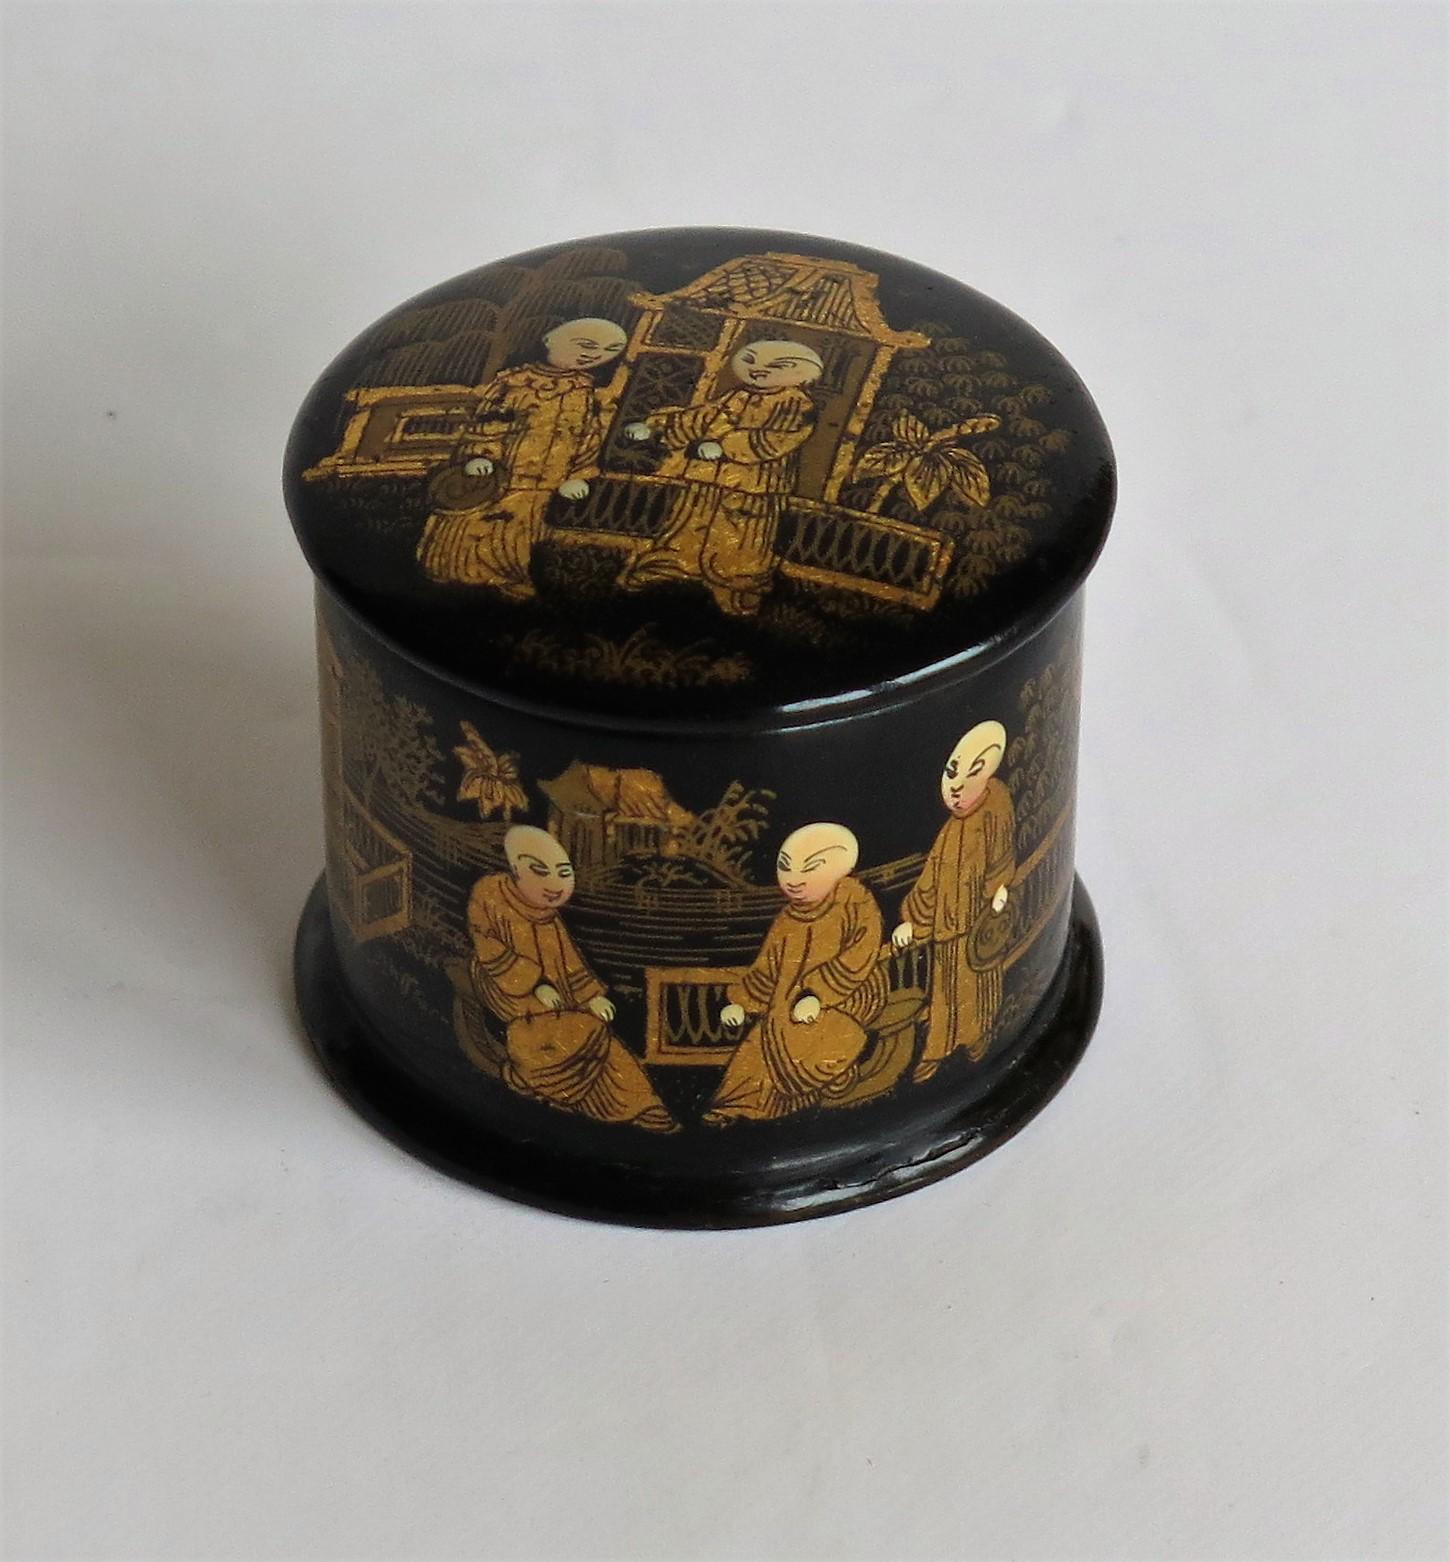 This is a beautiful papier mâché, circular black lacquered lidded box, hand enamelled and gilded, made in Japan in the 19th century late Meiji period, circa 1880.

The circular papier mâché box has a base rim with parallel sides and a snugly